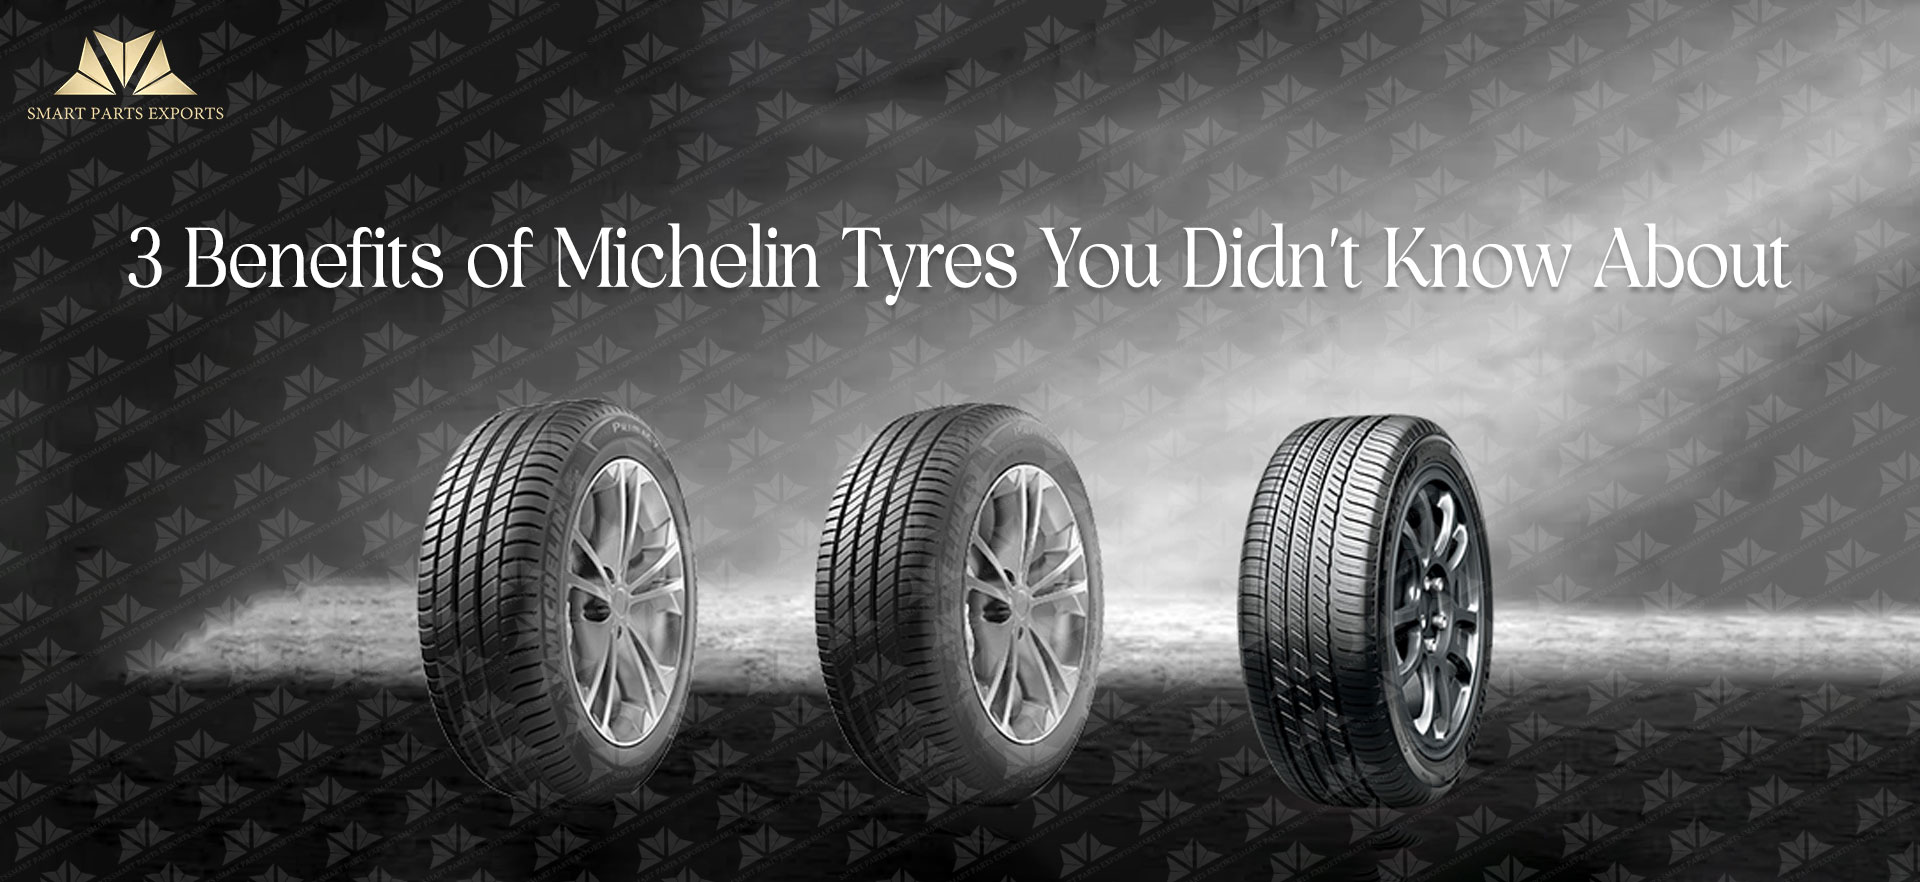 Michelin Genuine Bike, Car & SUV Tyres Exporter from India